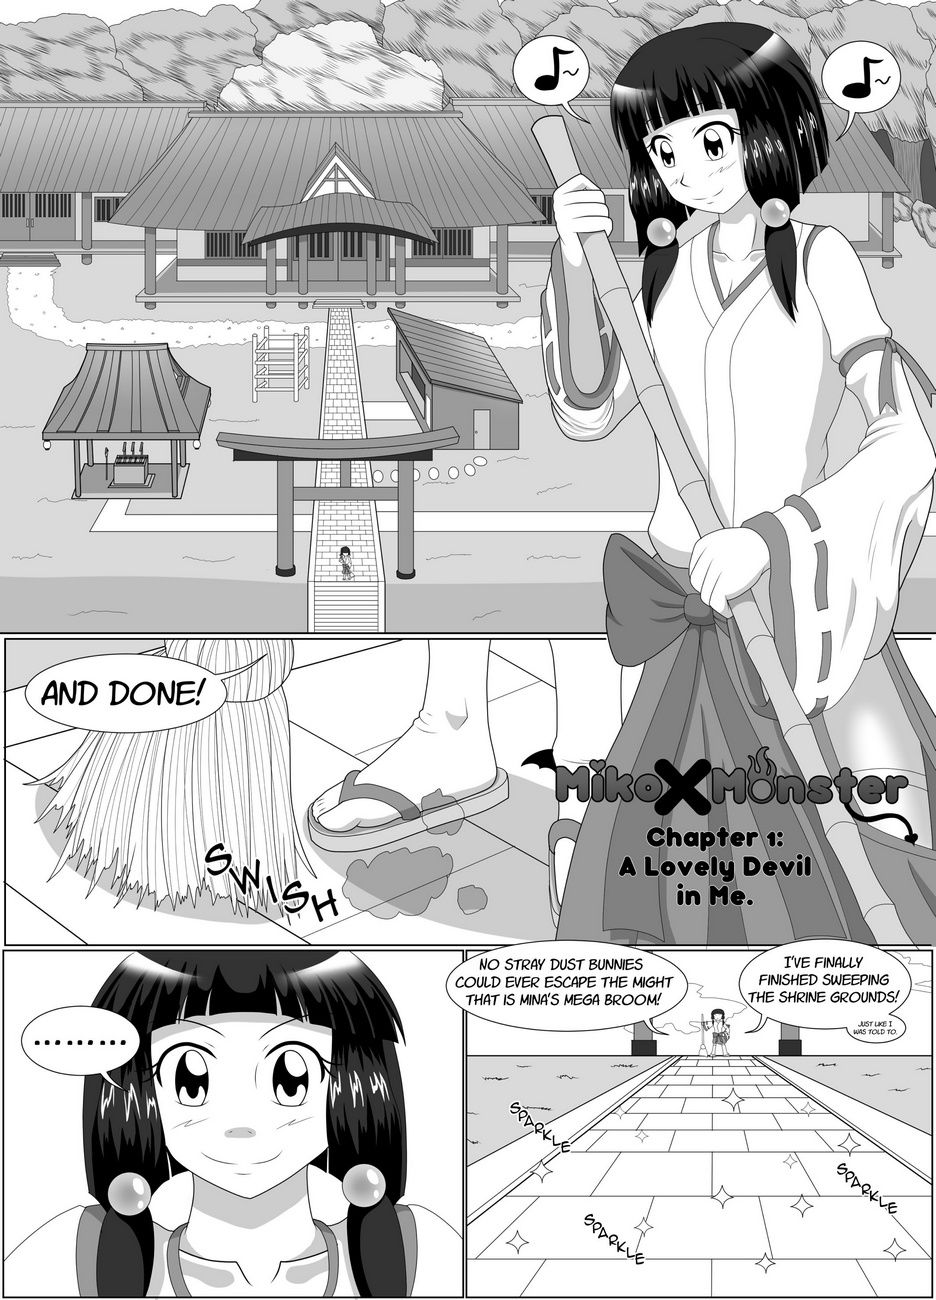 Miko X Monster 1 page 3